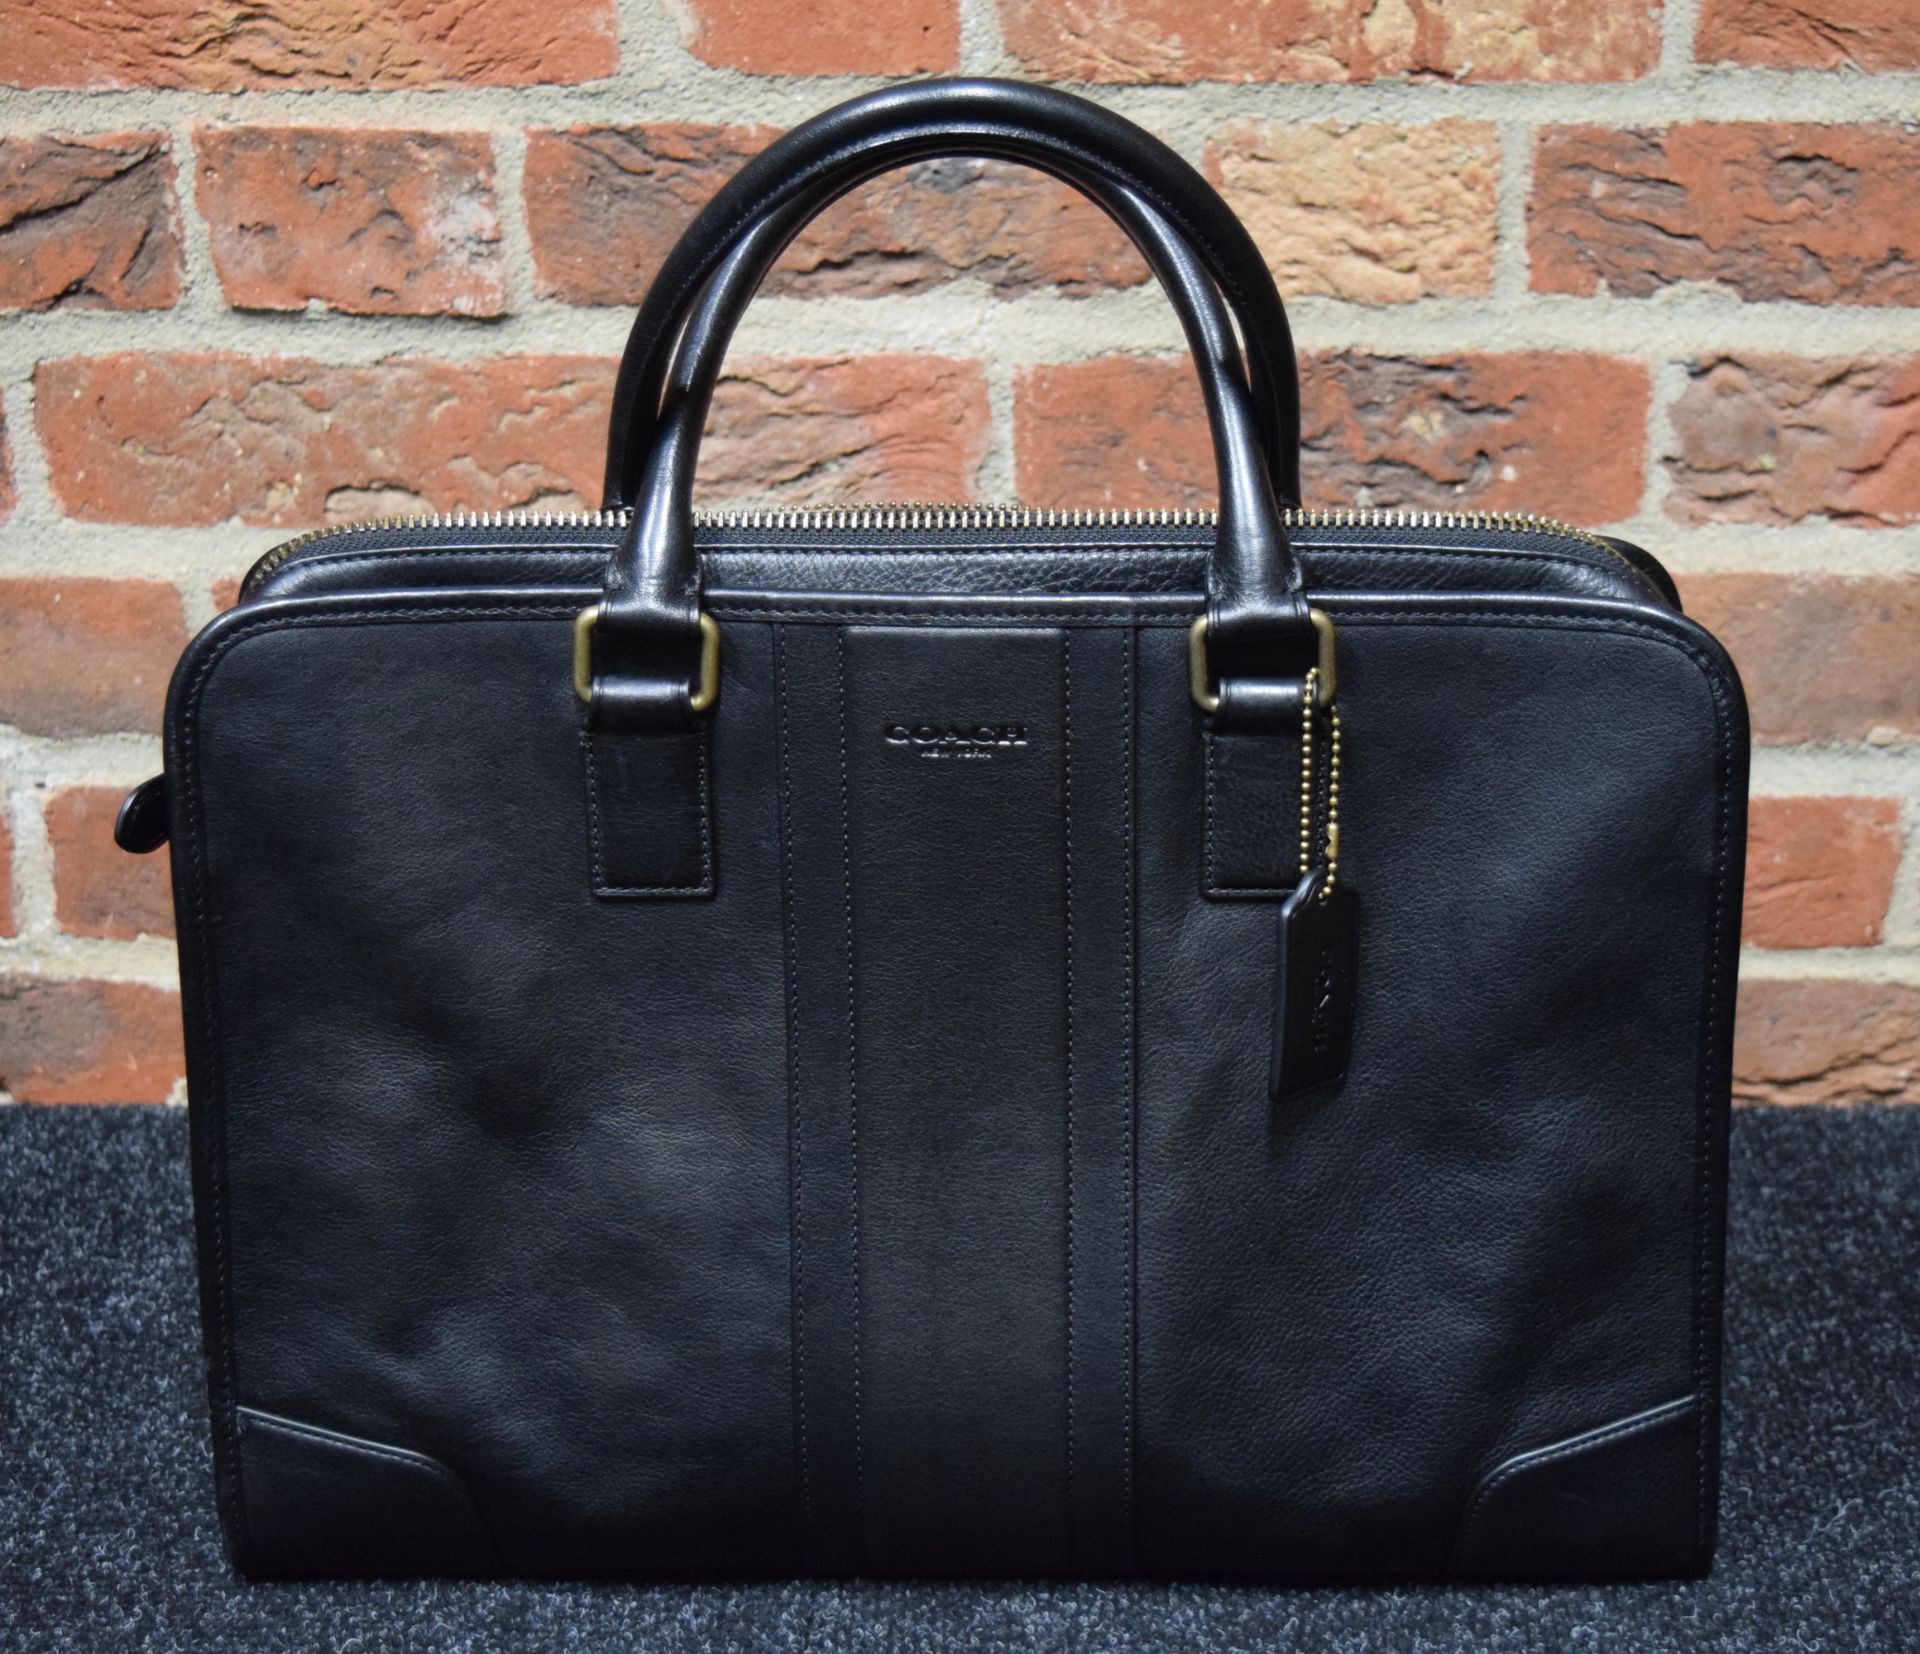 COACH NEW YORK BLACK LEATHER/ BRASS LAPTOP / DOCUMENT BAG (HOLDALL) - AS NEW WITH COACH LEATHER TAG